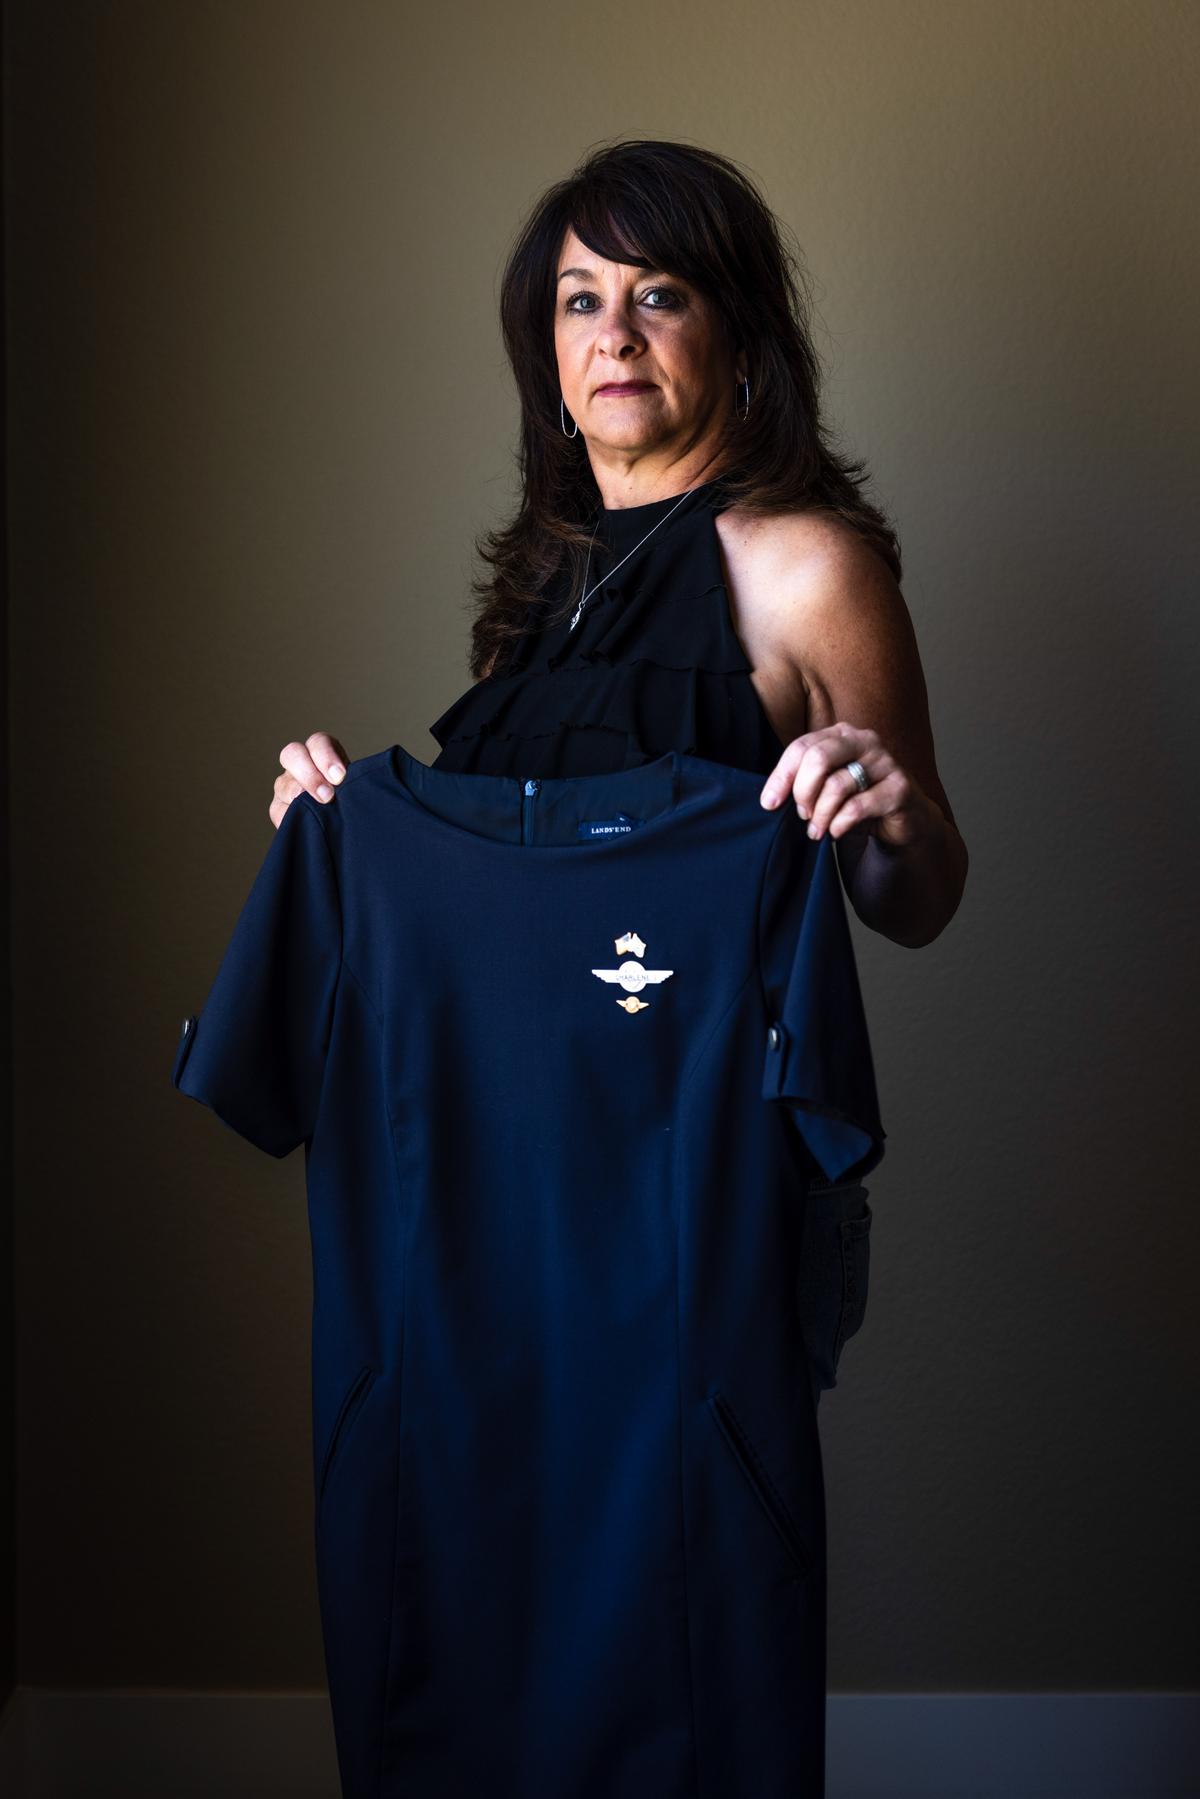 Charlene Carter holds her former Southwest Airlines flight attendant's uniform at her home in Aurora, Colo., on Aug. 30, 2022. (Michael Ciaglo for The Epoch Times)